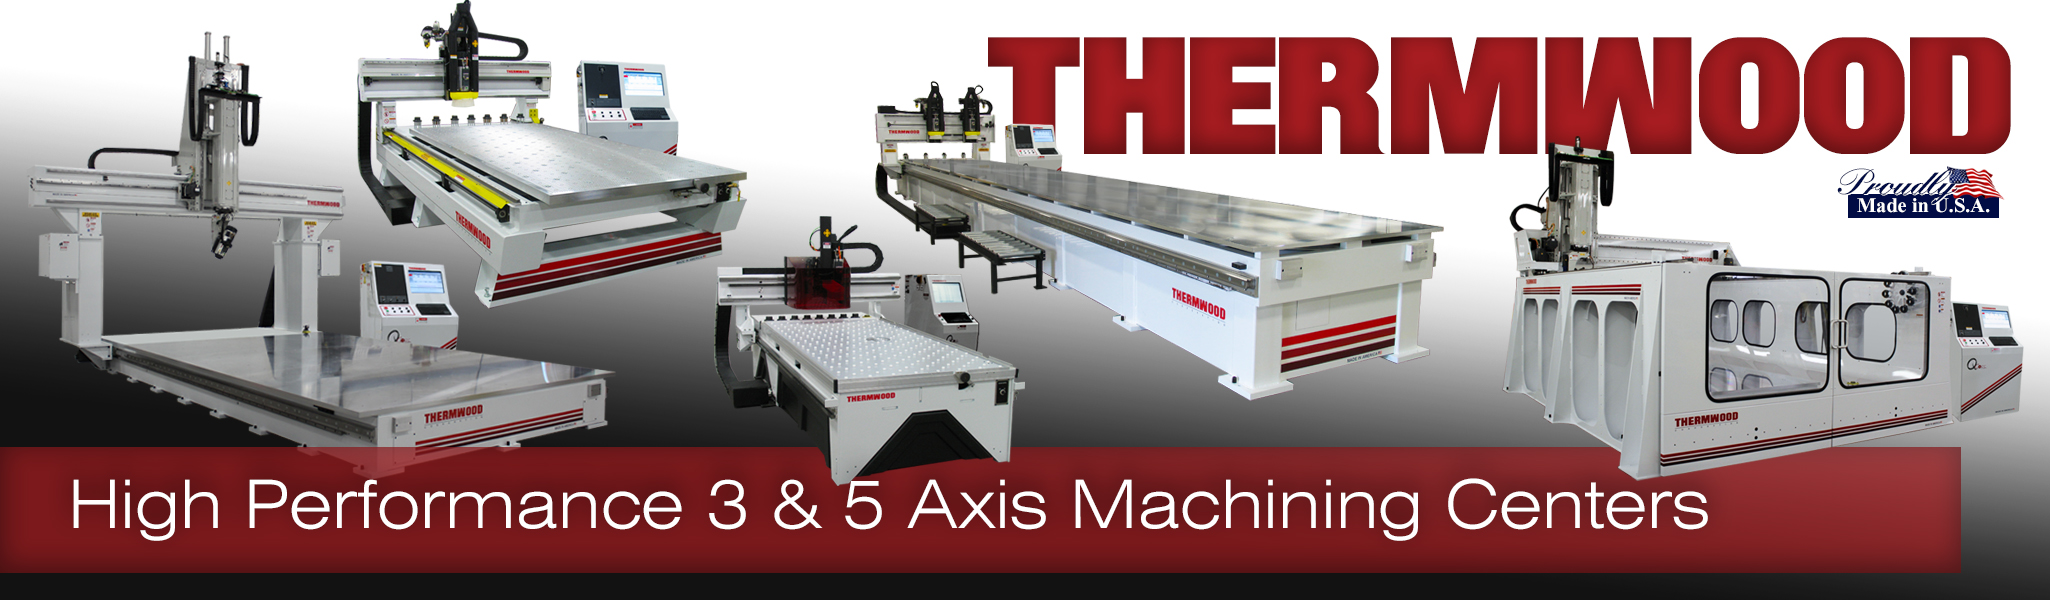 Thermwood – CNC Routers and Large Scale Additive Machines